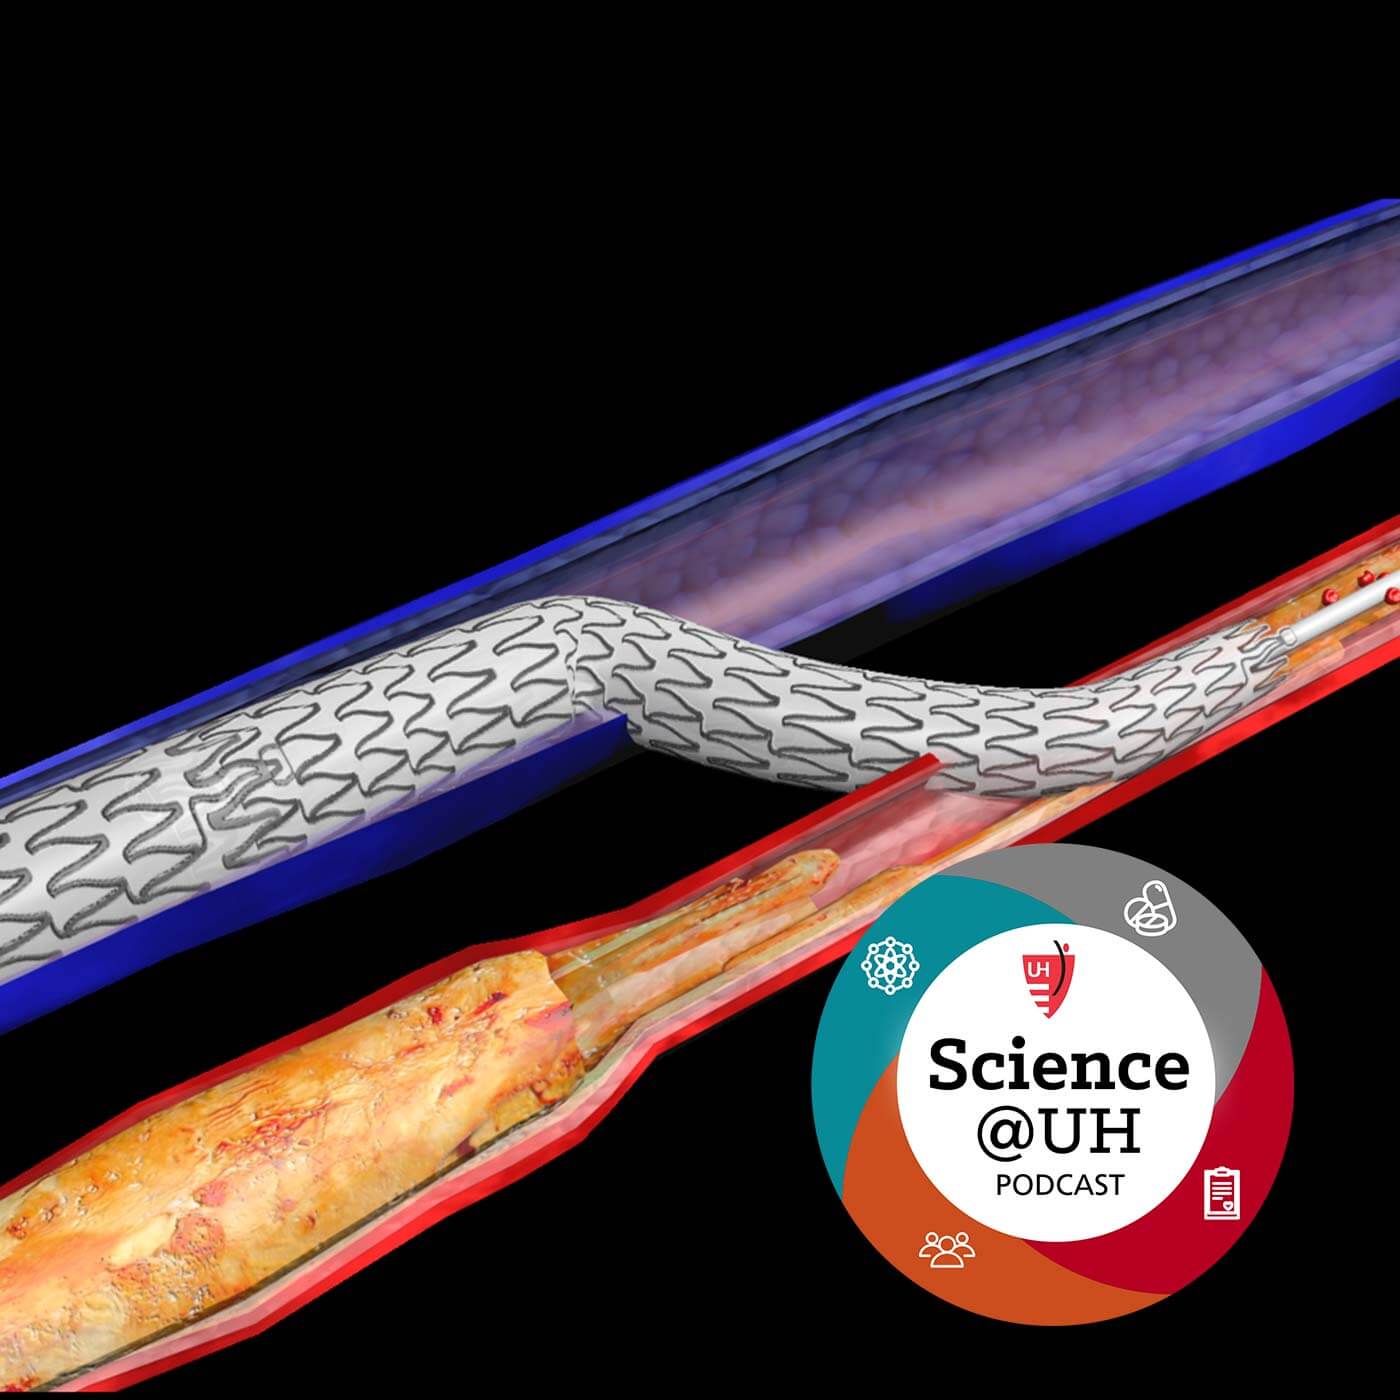 LimFlow Technology Redefines Biology: Reverses Blood Flow to Prevent Limb Amputations